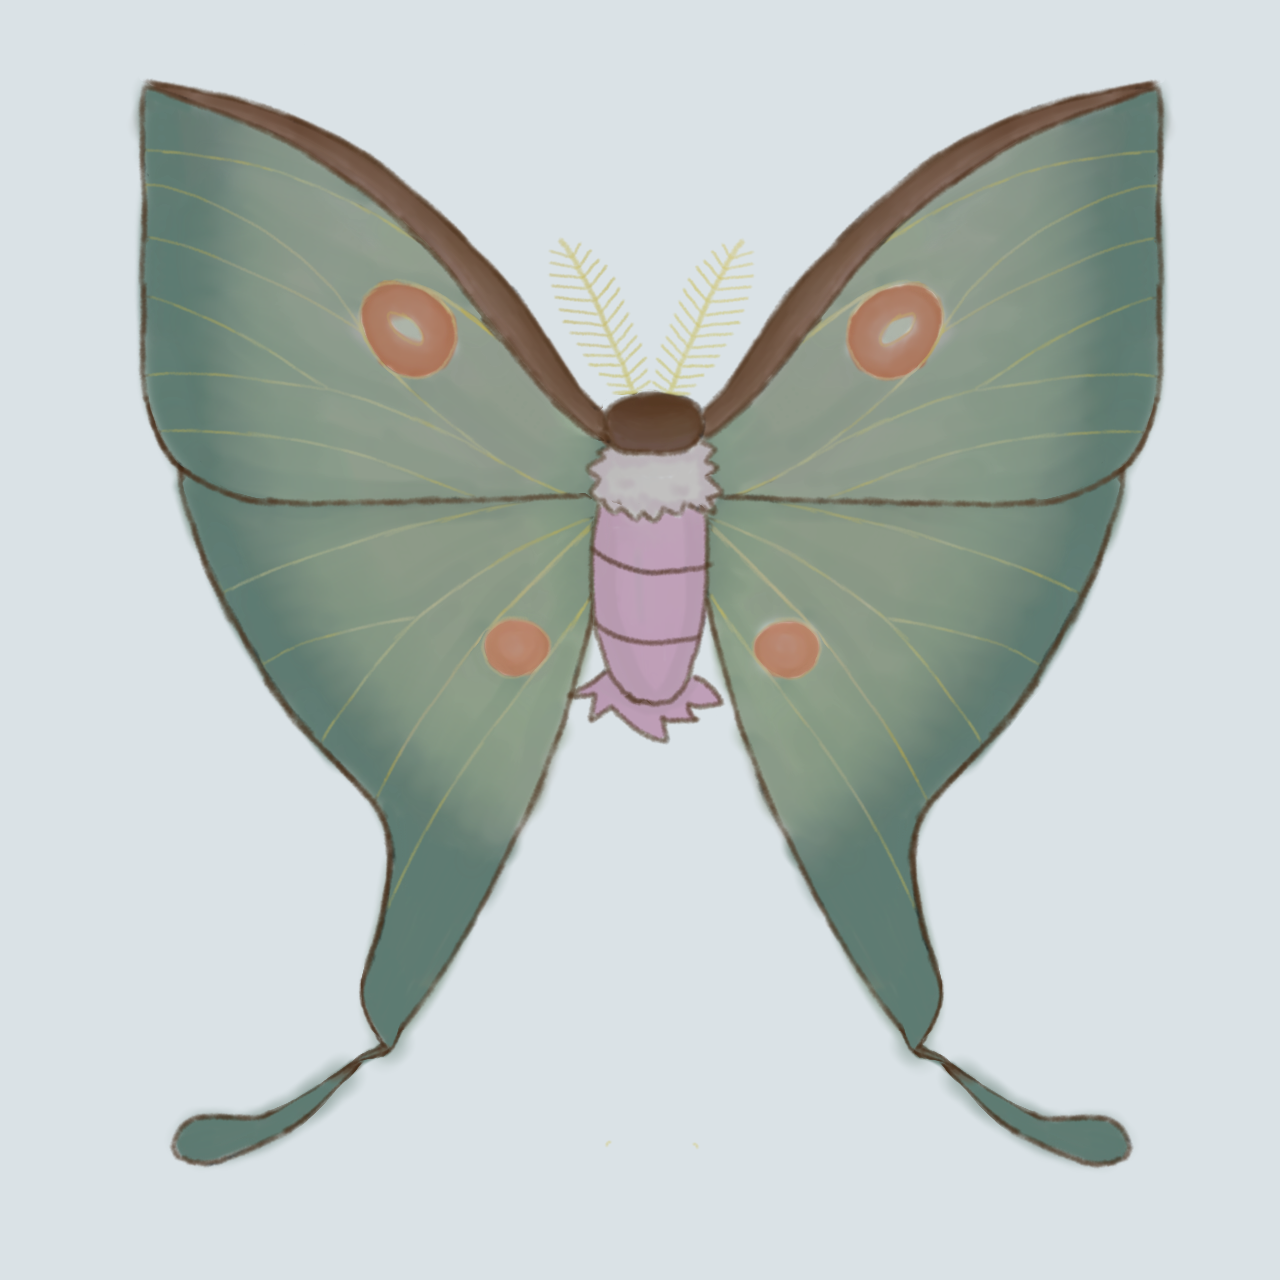 An illustration of the Pokemon Dustox, drawn in a slightly more realistic style which resembles a Japanese Lunar Moth.